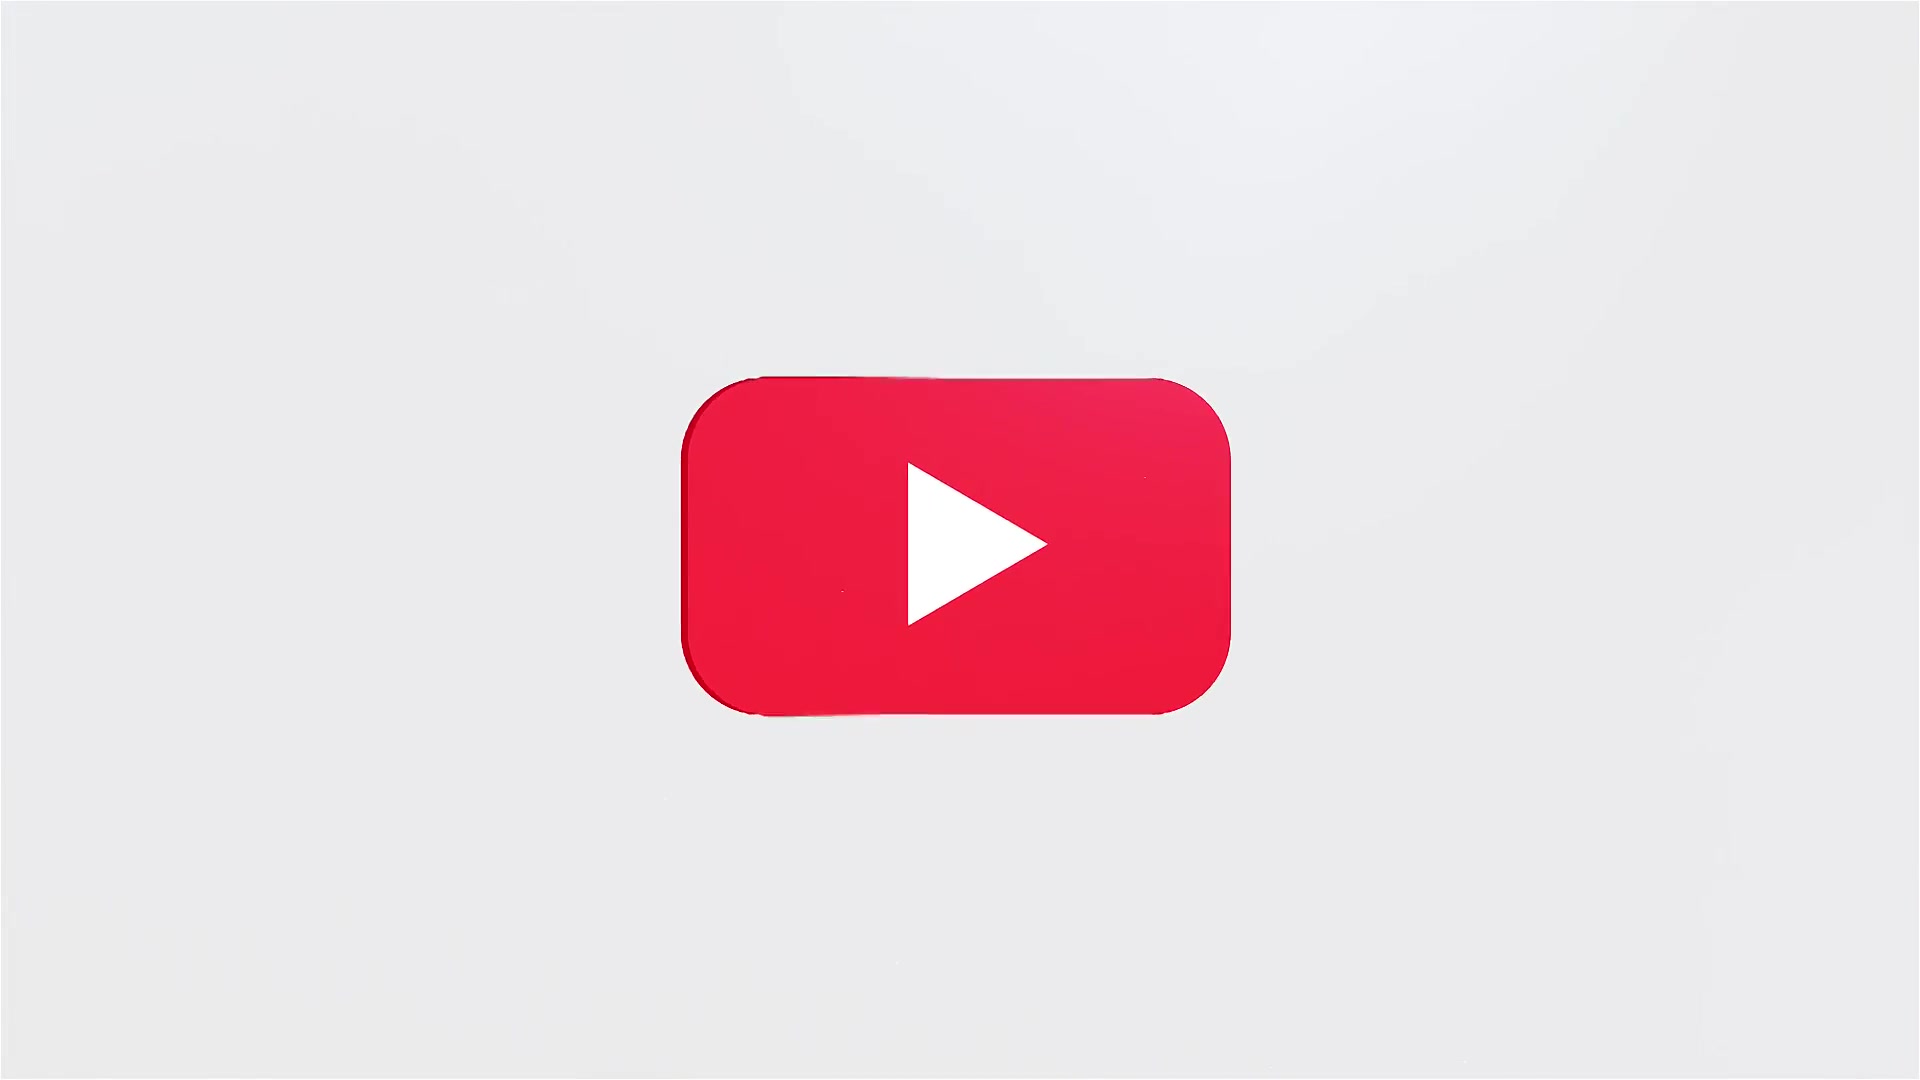 YouTube Short Logo Reveal Videohive 25507062 Download Rapid After Effects